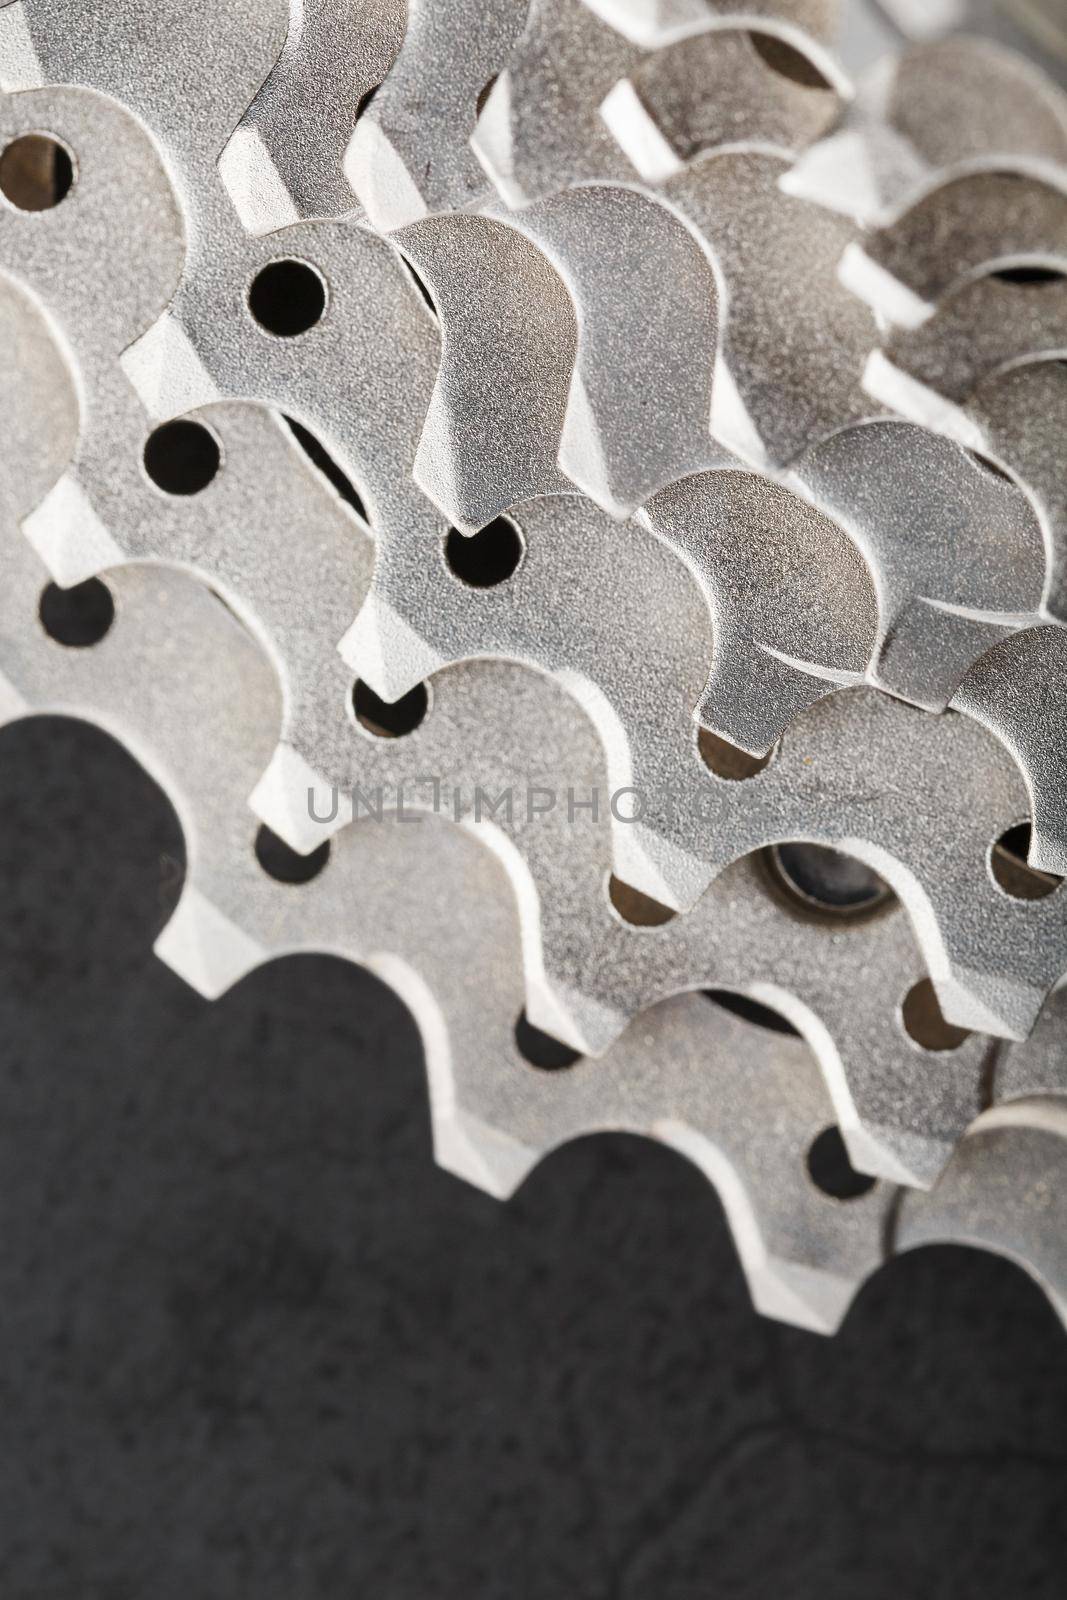 Bicycle stars from a bicycle chain drive mechanism on a black background